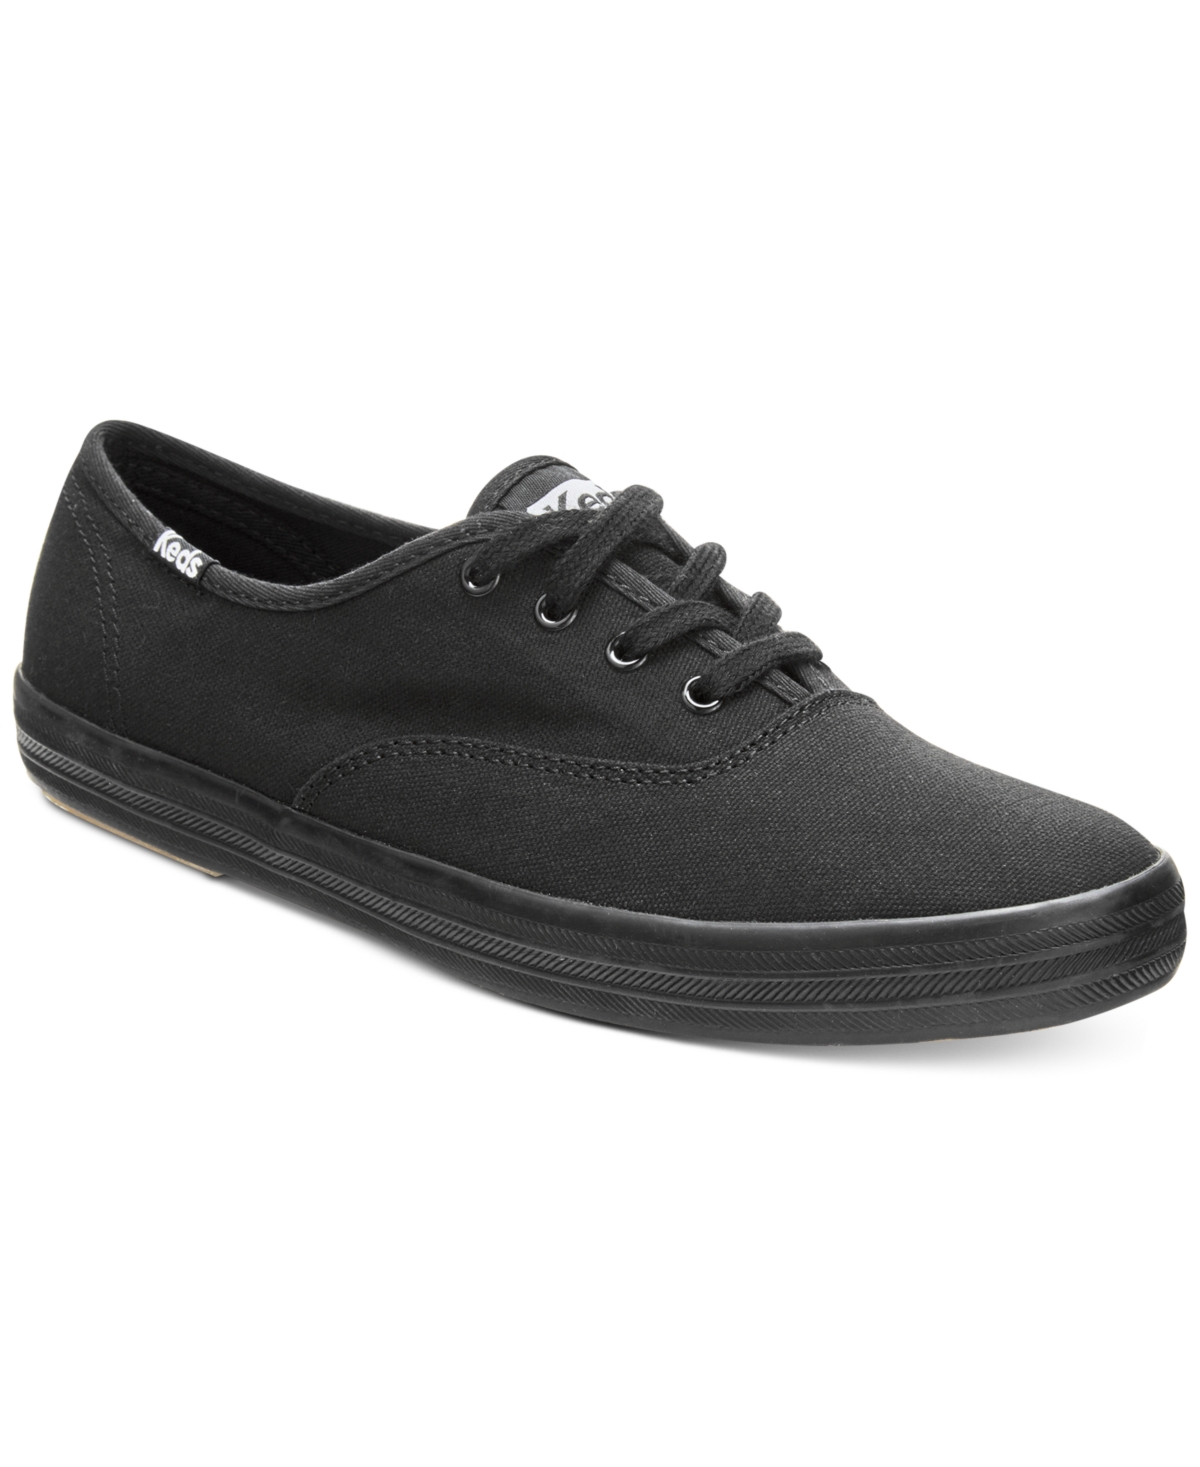 UPC 044208122713 product image for Keds Women's Champion Ortholite Lace-Up Oxford Fashion Sneakers from Finish Line | upcitemdb.com